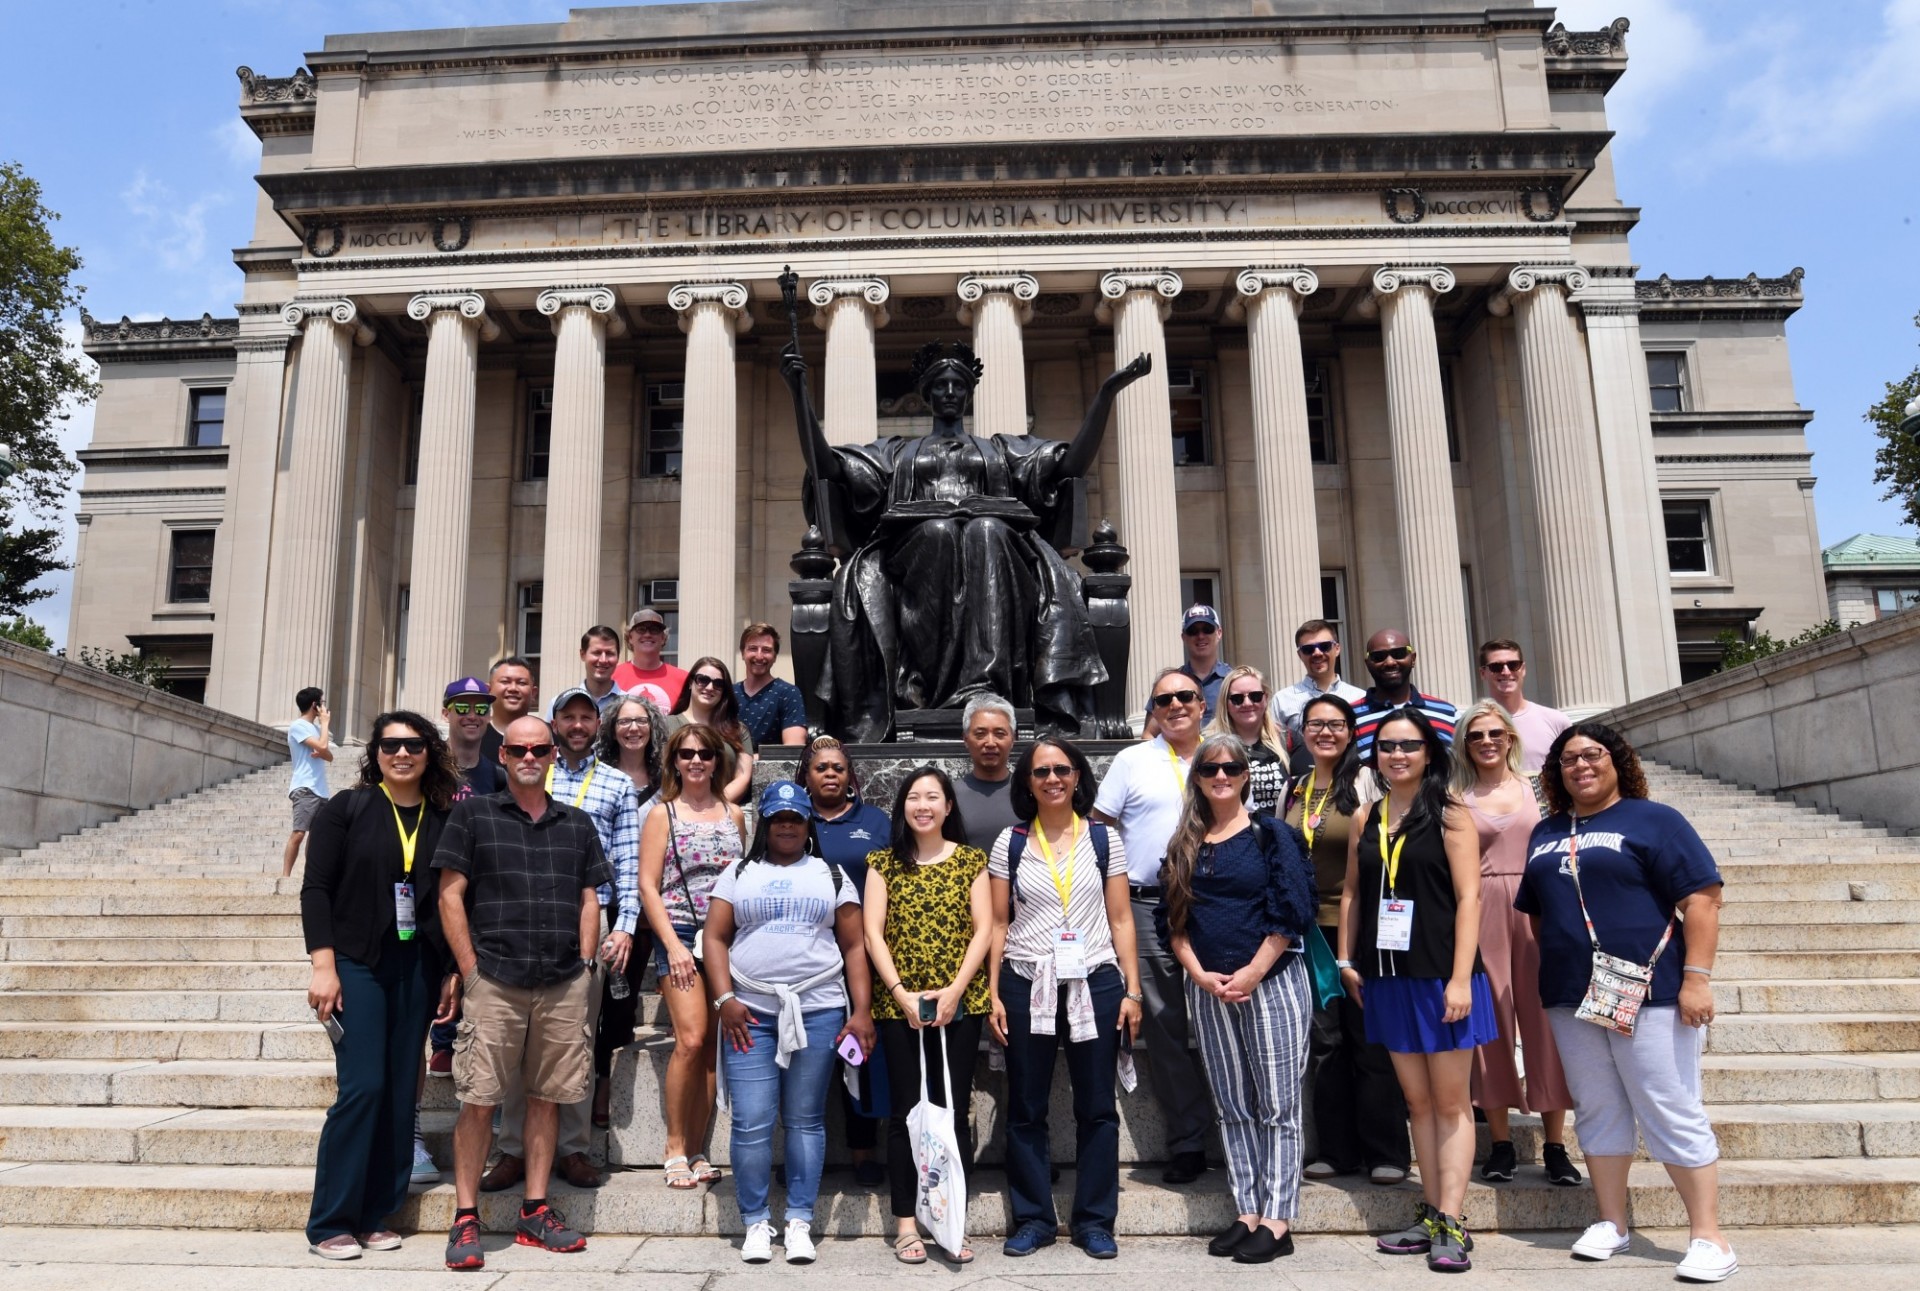 Tour group posing in front of Alma Mater on Columbia's Morningside campus